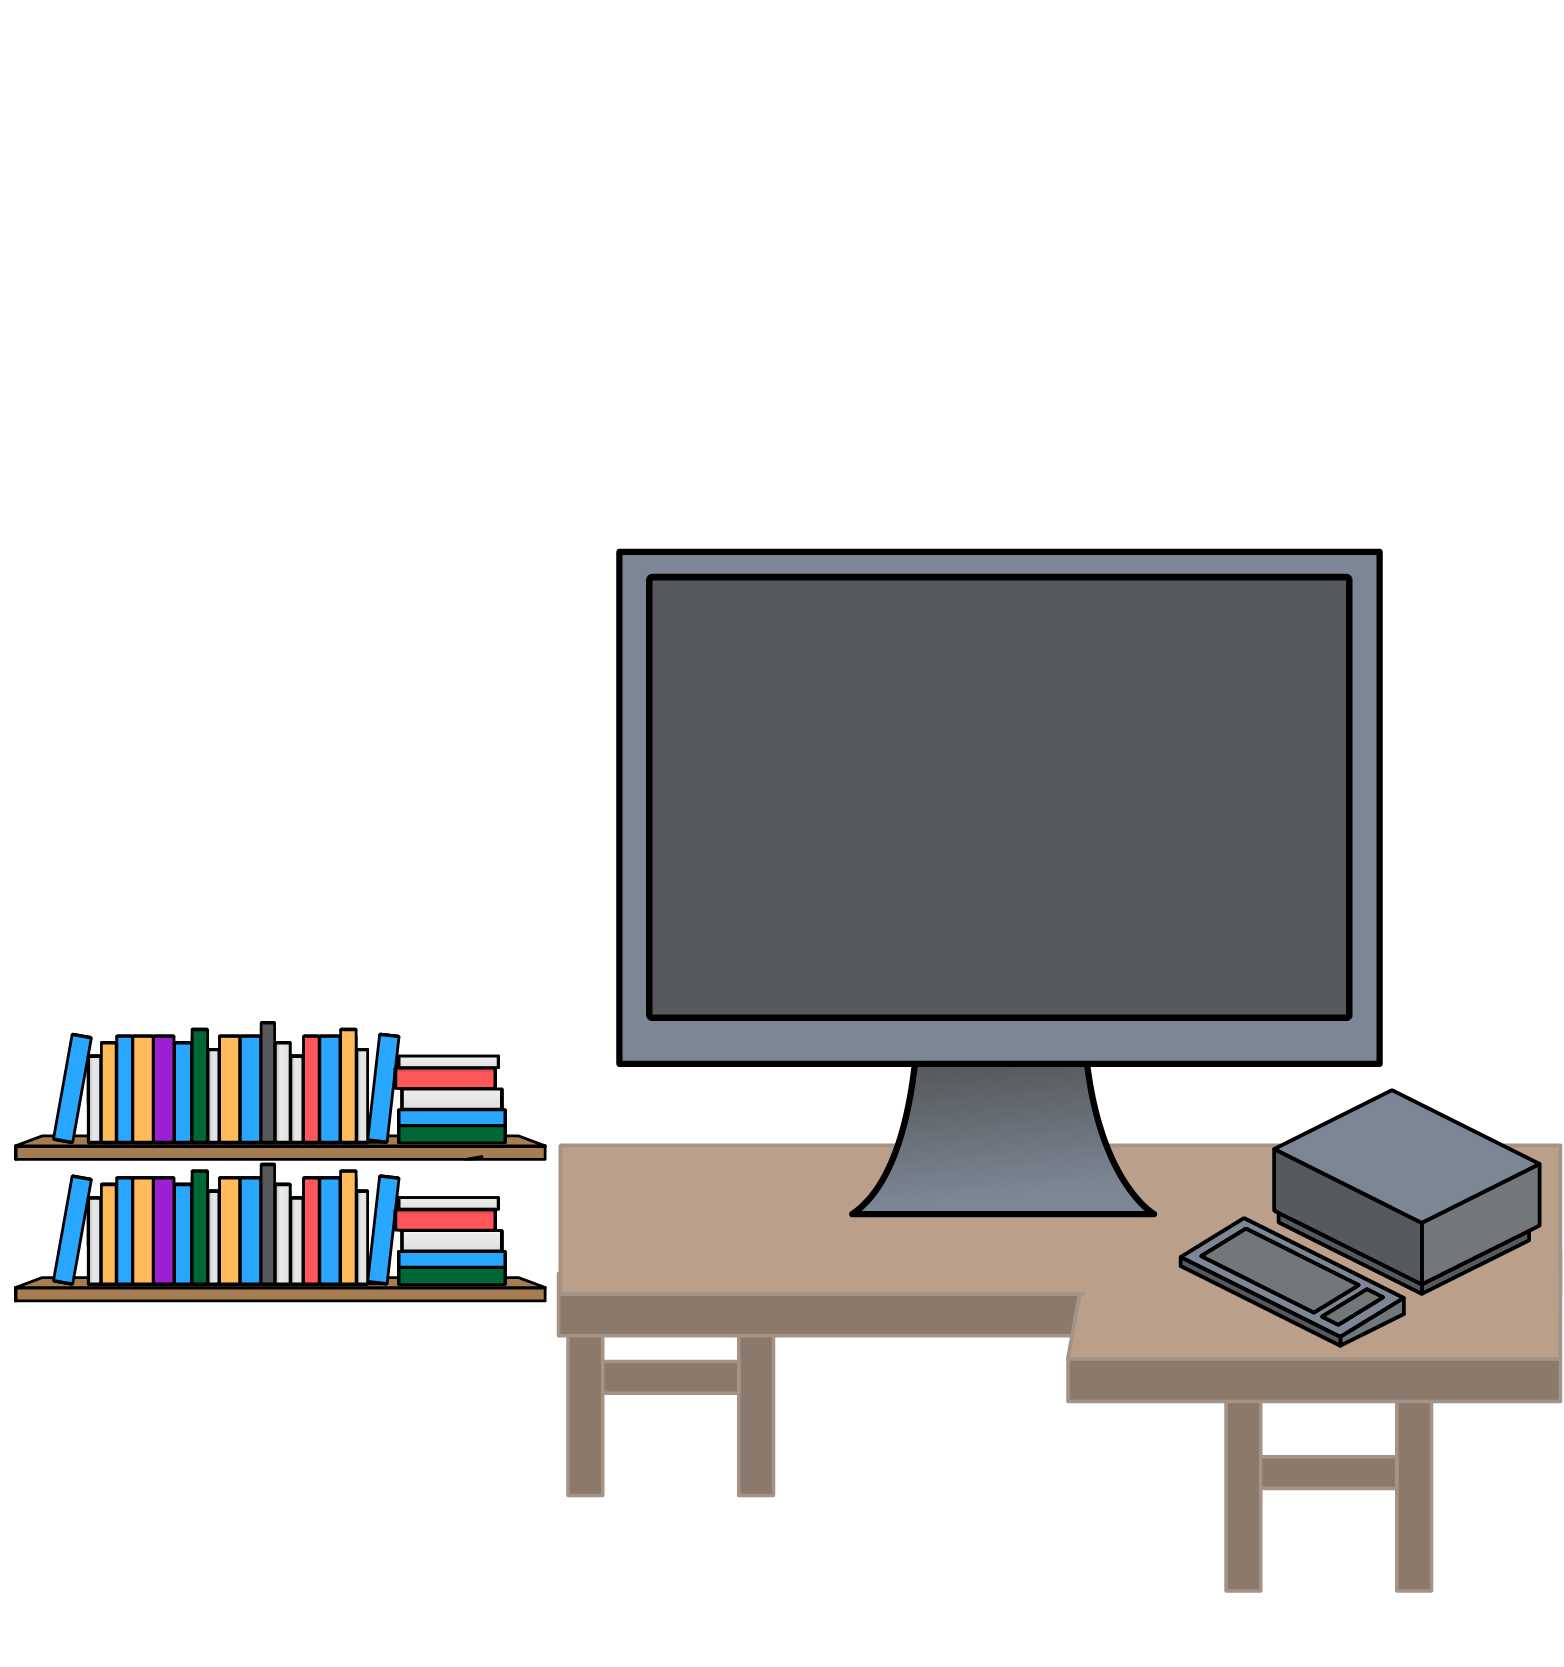 Scene environment of the computer lab in the school's library